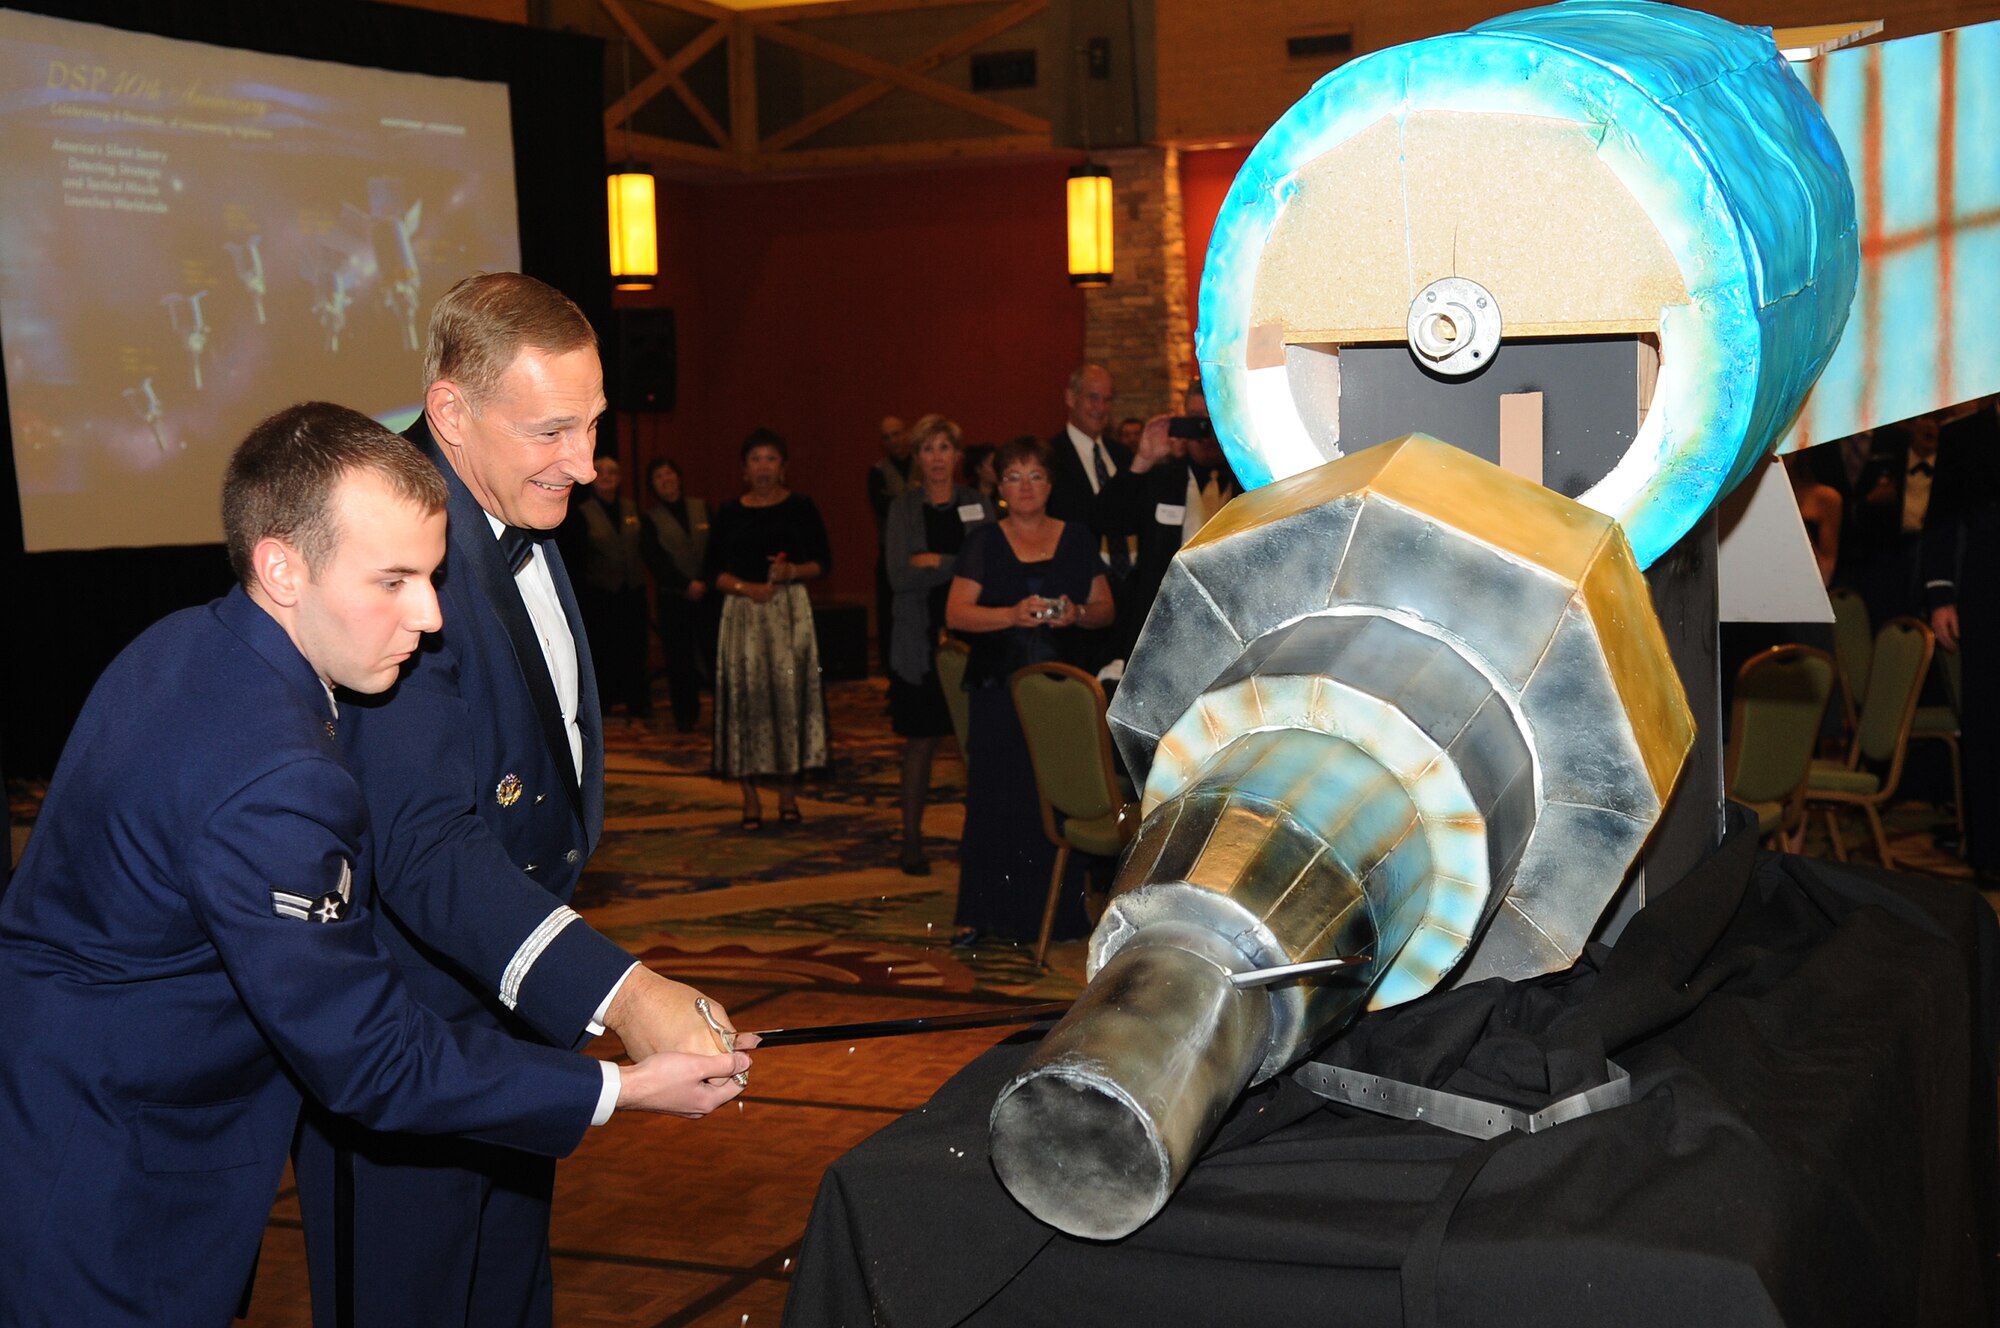 BUCKLEY AIR FORCE BASE, Colo.--Maj. Gen. Michael J. Basla, vice commander of  Air Force Space Command and A1C John Draper, the youngest Airman assigned to the 2nd Space Warning Squadron at Buckley Air Force Base share the honors of cutting up the mock up of the Defense Support Program (DSP) cake during the 40th Anniversary Gala on Nov. 6 2010. (U.S. Air Force Photo by Airman Manisha Vasquez) 